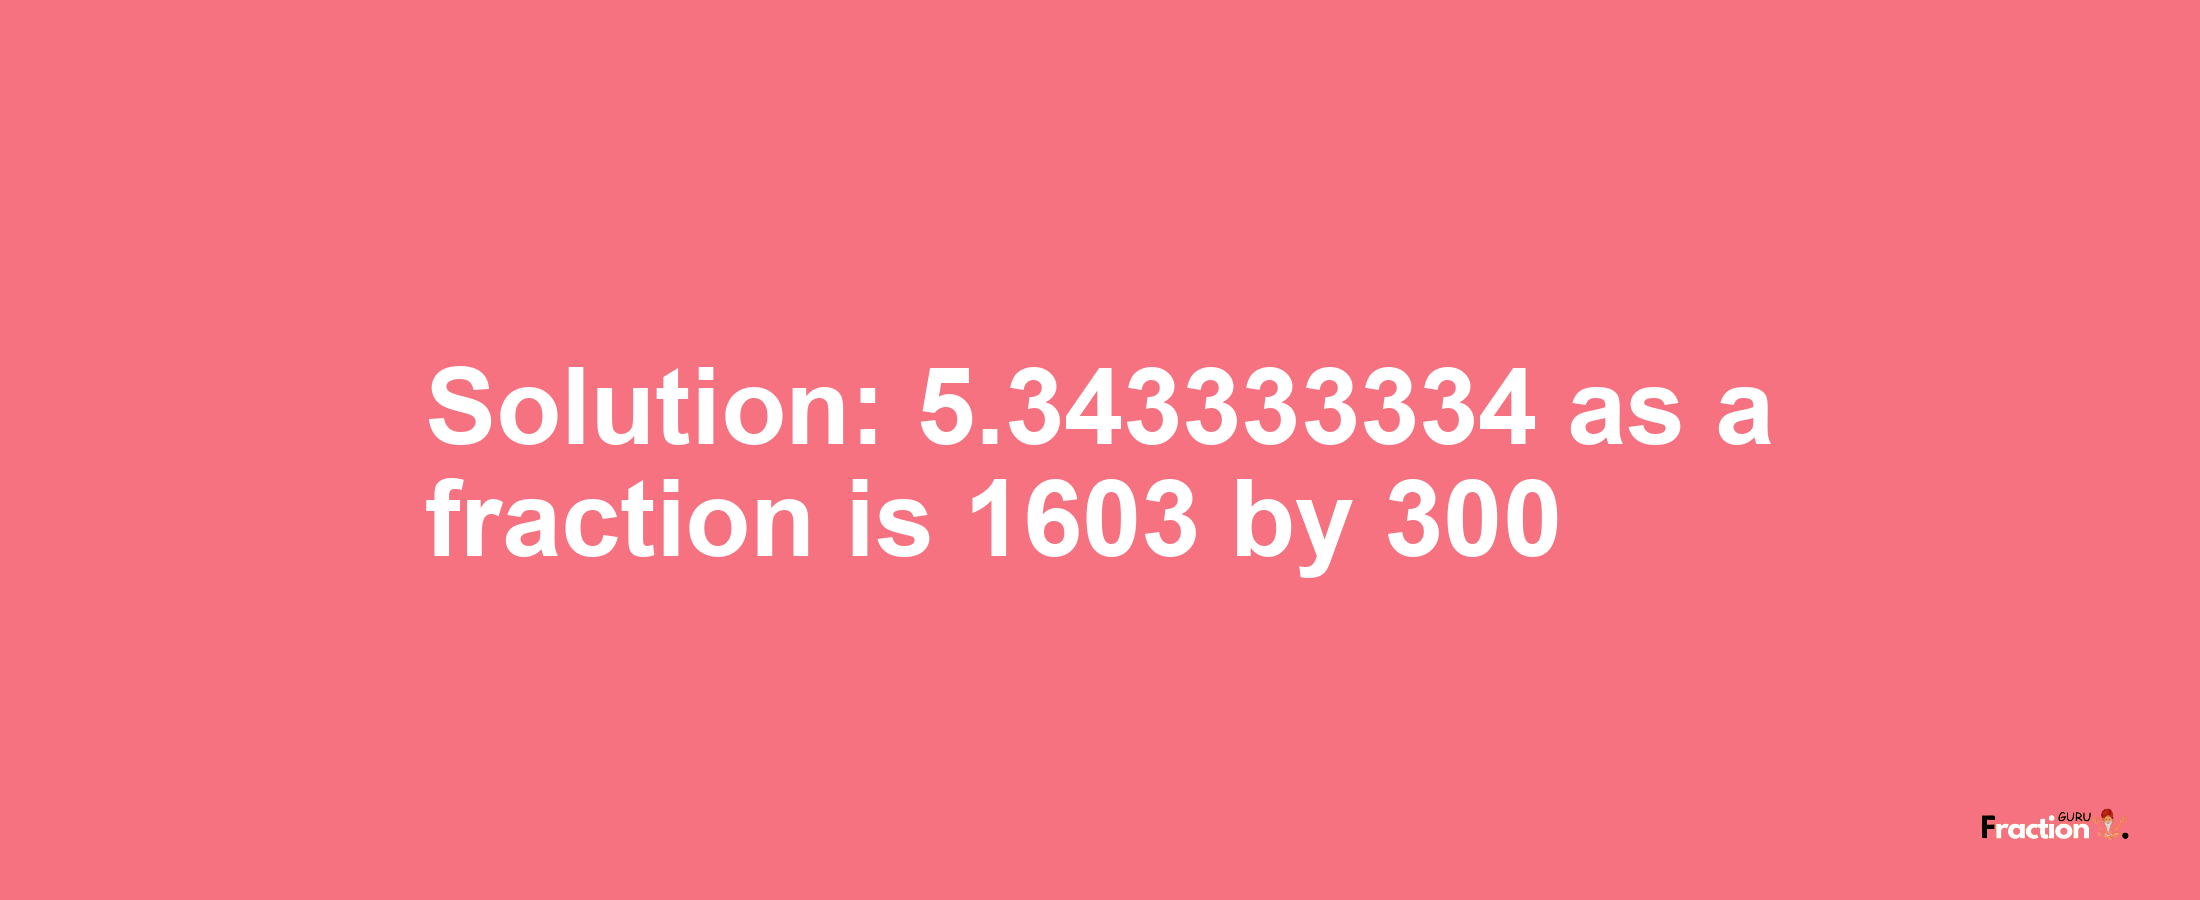 Solution:5.343333334 as a fraction is 1603/300